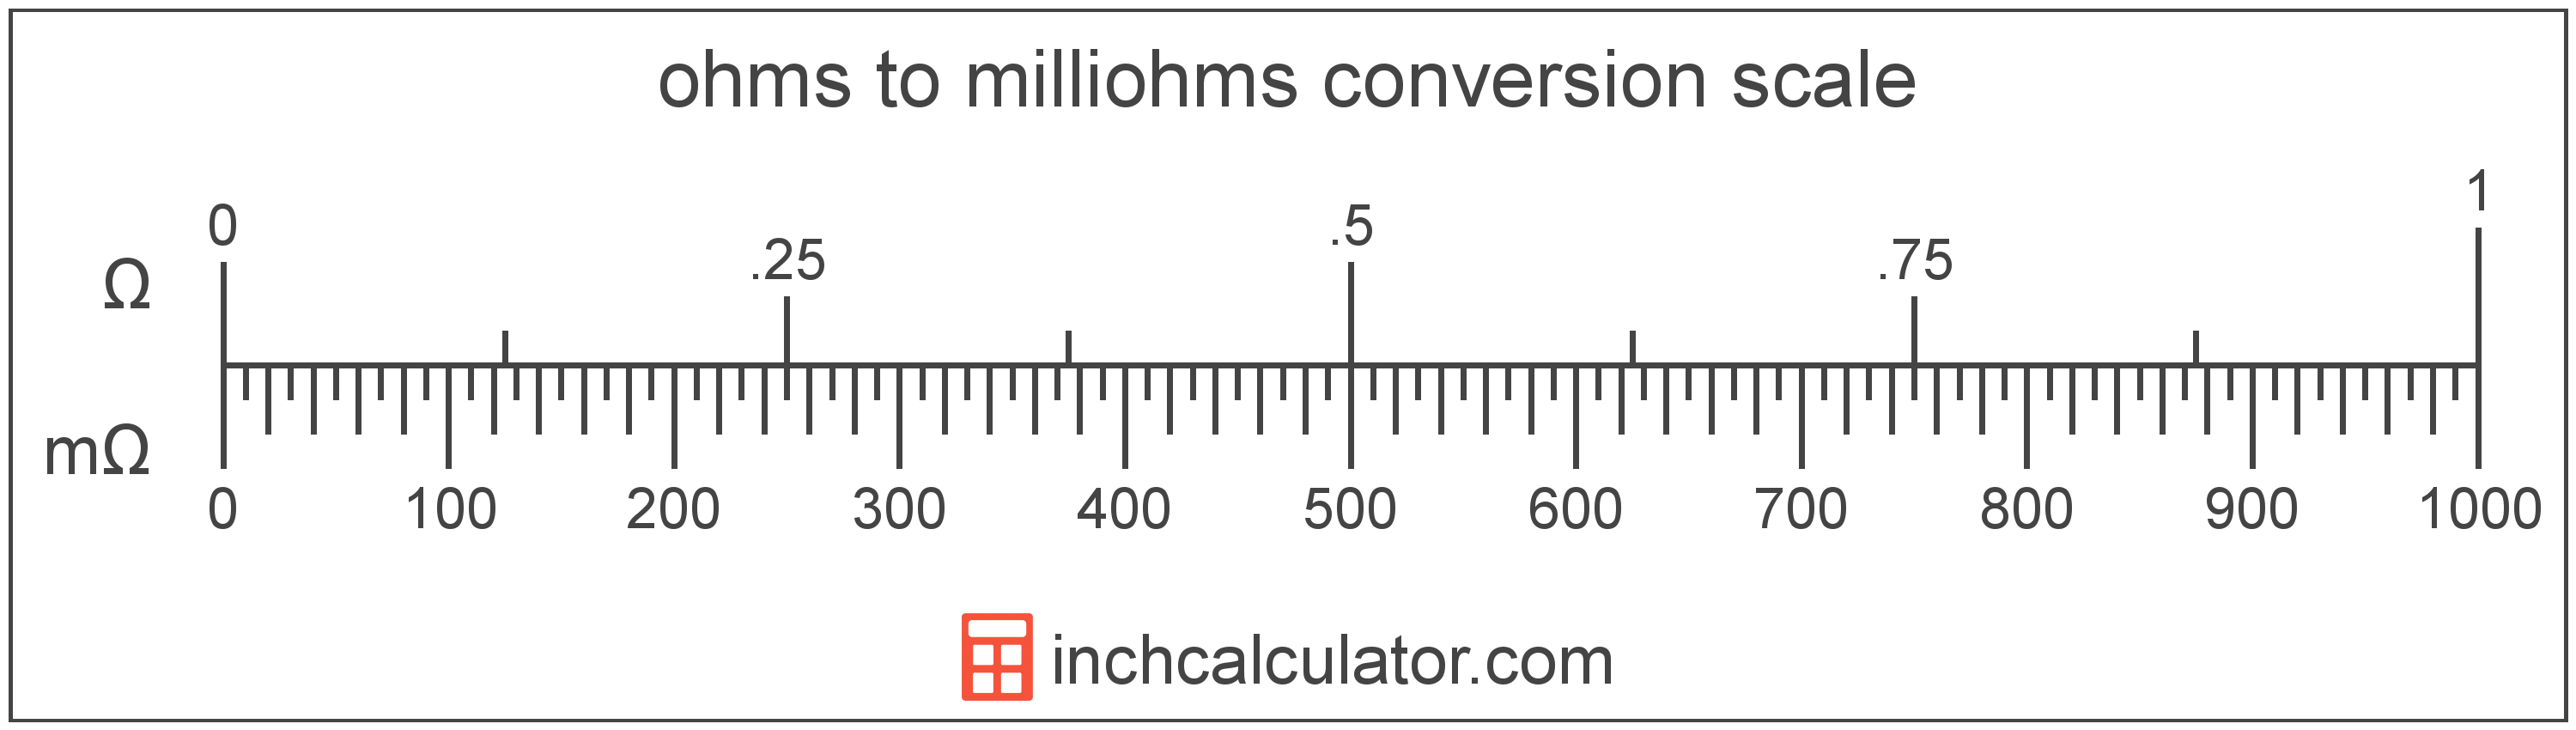 conversion scale showing ohms and equivalent milliohms electrical resistance values